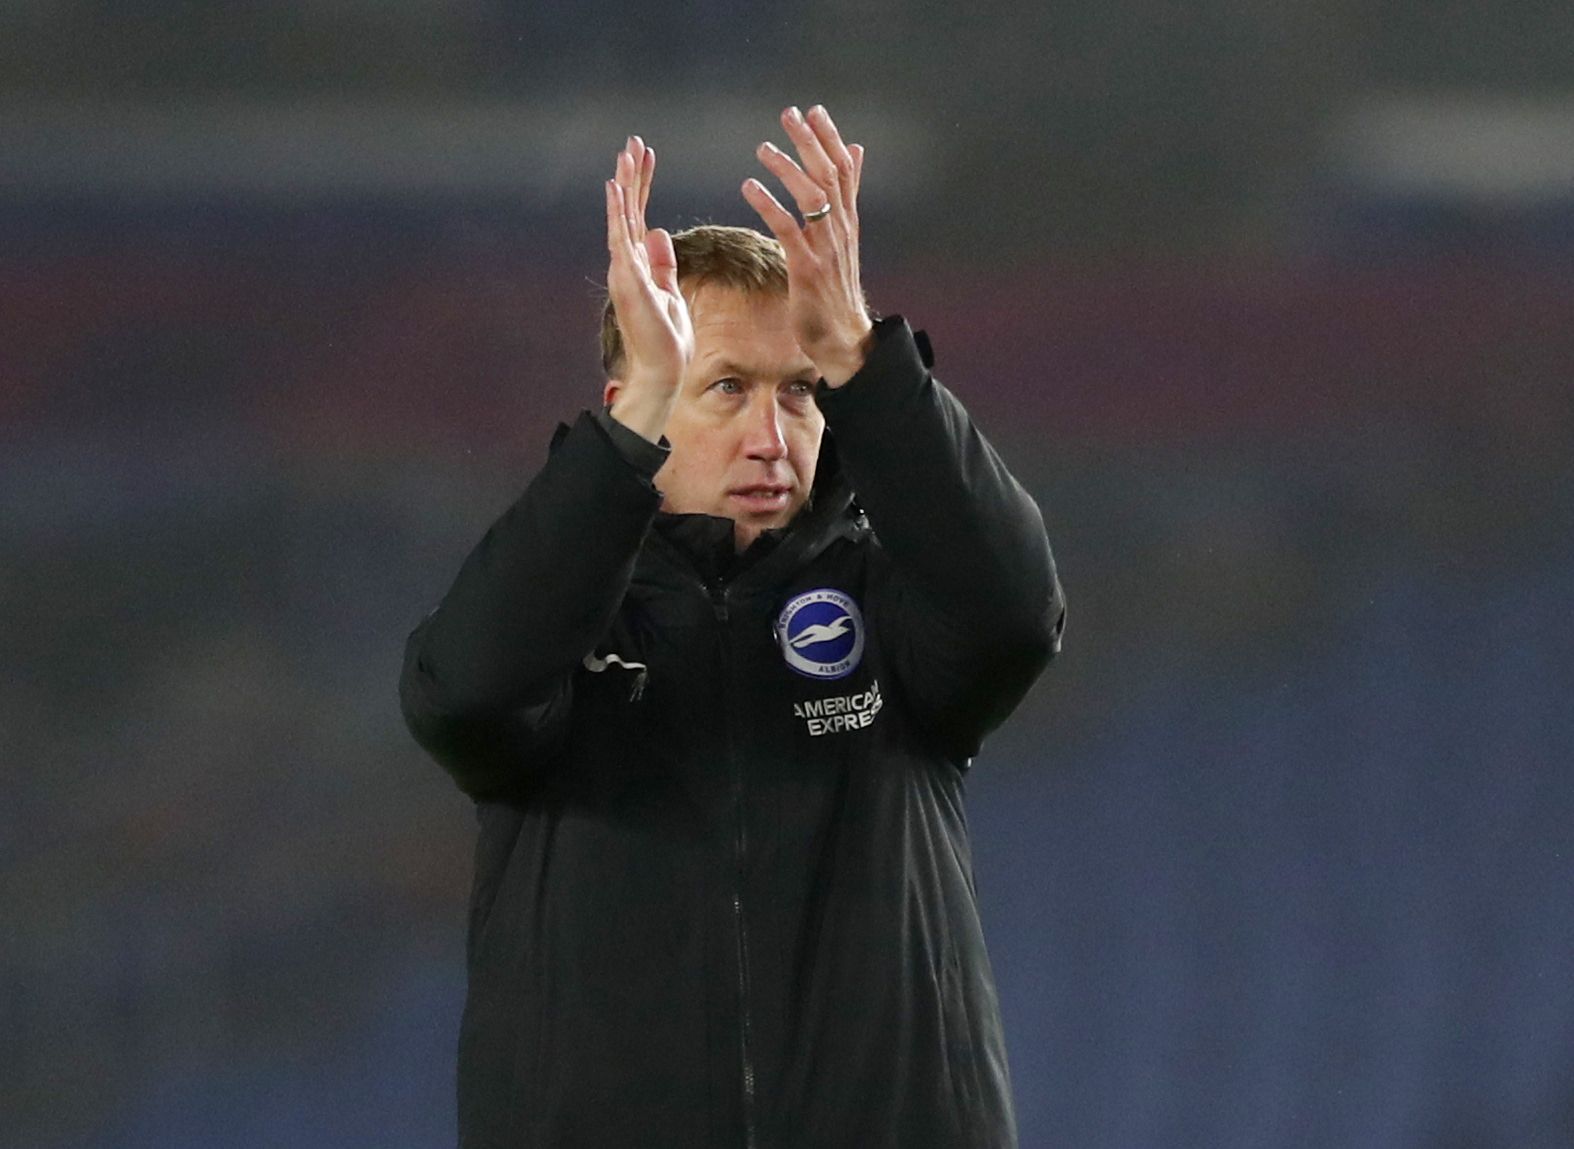 Soccer Football - Premier League - Brighton &amp; Hove Albion v Southampton - The American Express Community Stadium, Brighton, Britain - December 7, 2020   Brighton &amp; Hove Albion manager Graham Potter looks dejected after the match Pool via REUTERS/Naomi Baker EDITORIAL USE ONLY. No use with unauthorized audio, video, data, fixture lists, club/league logos or 'live' services. Online in-match use limited to 75 images, no video emulation. No use in betting, games or single club /league/player